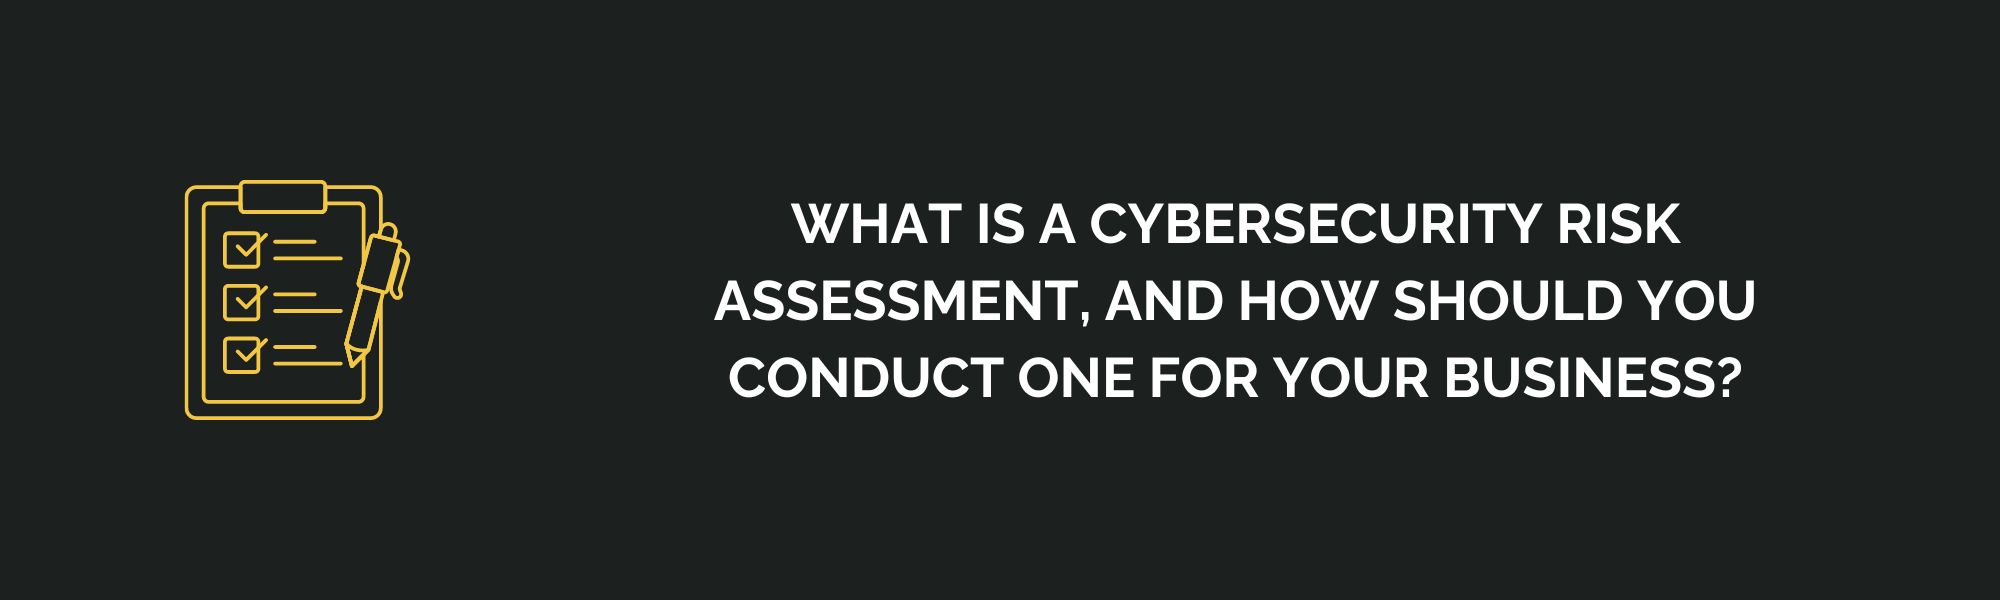 What Is a Cybersecurity Risk Assessment, and How Should You Conduct One for Your Business?